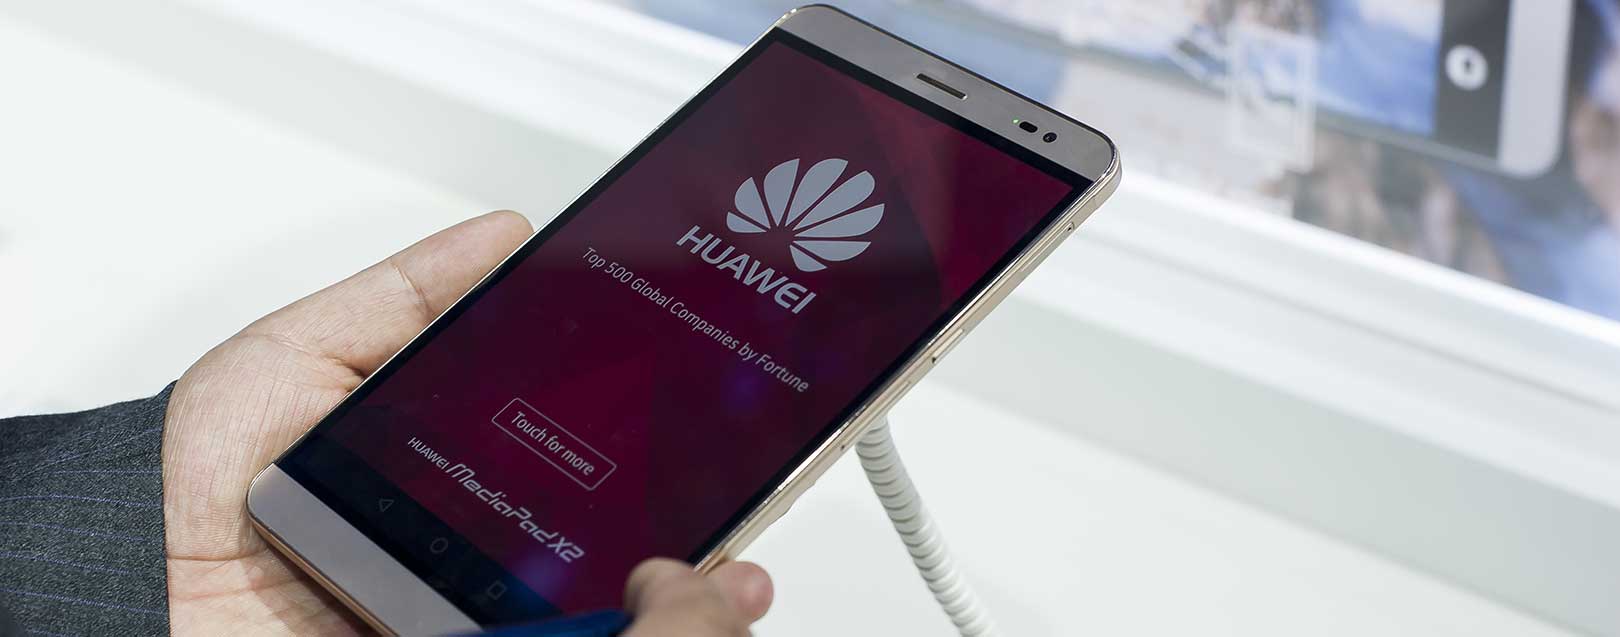 Huawei to commence smartphone production in India next month